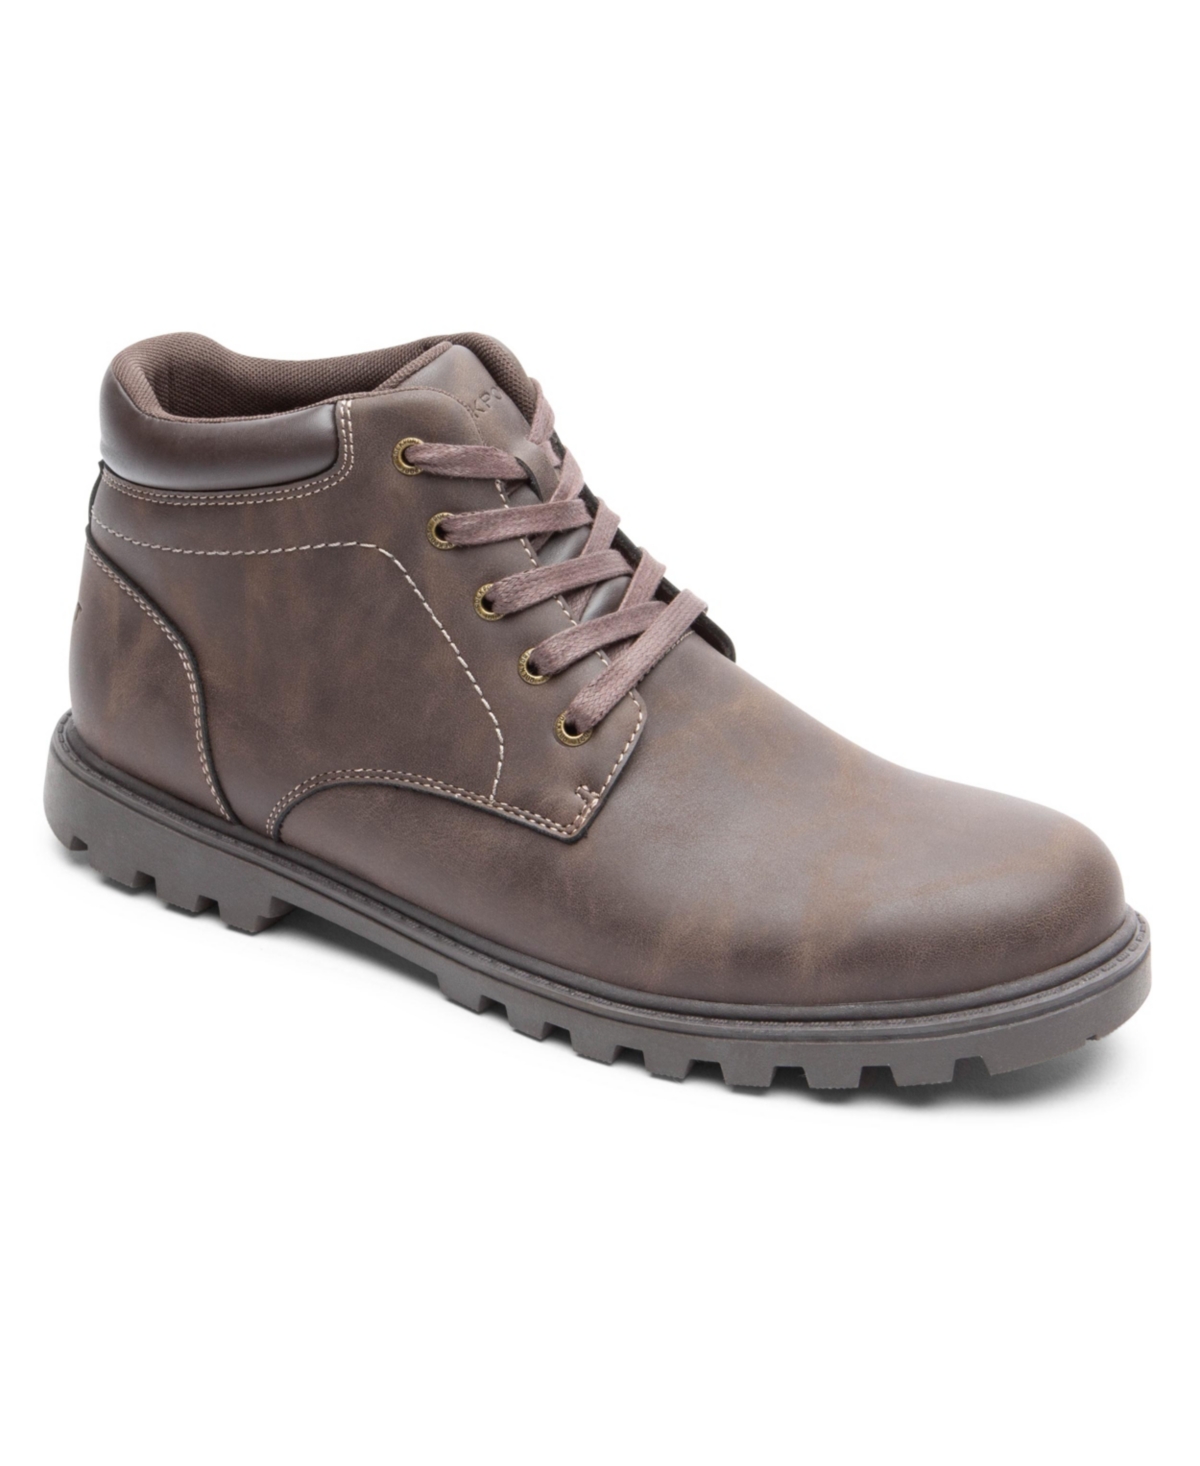 Men's Highview Casual Boots - Brown